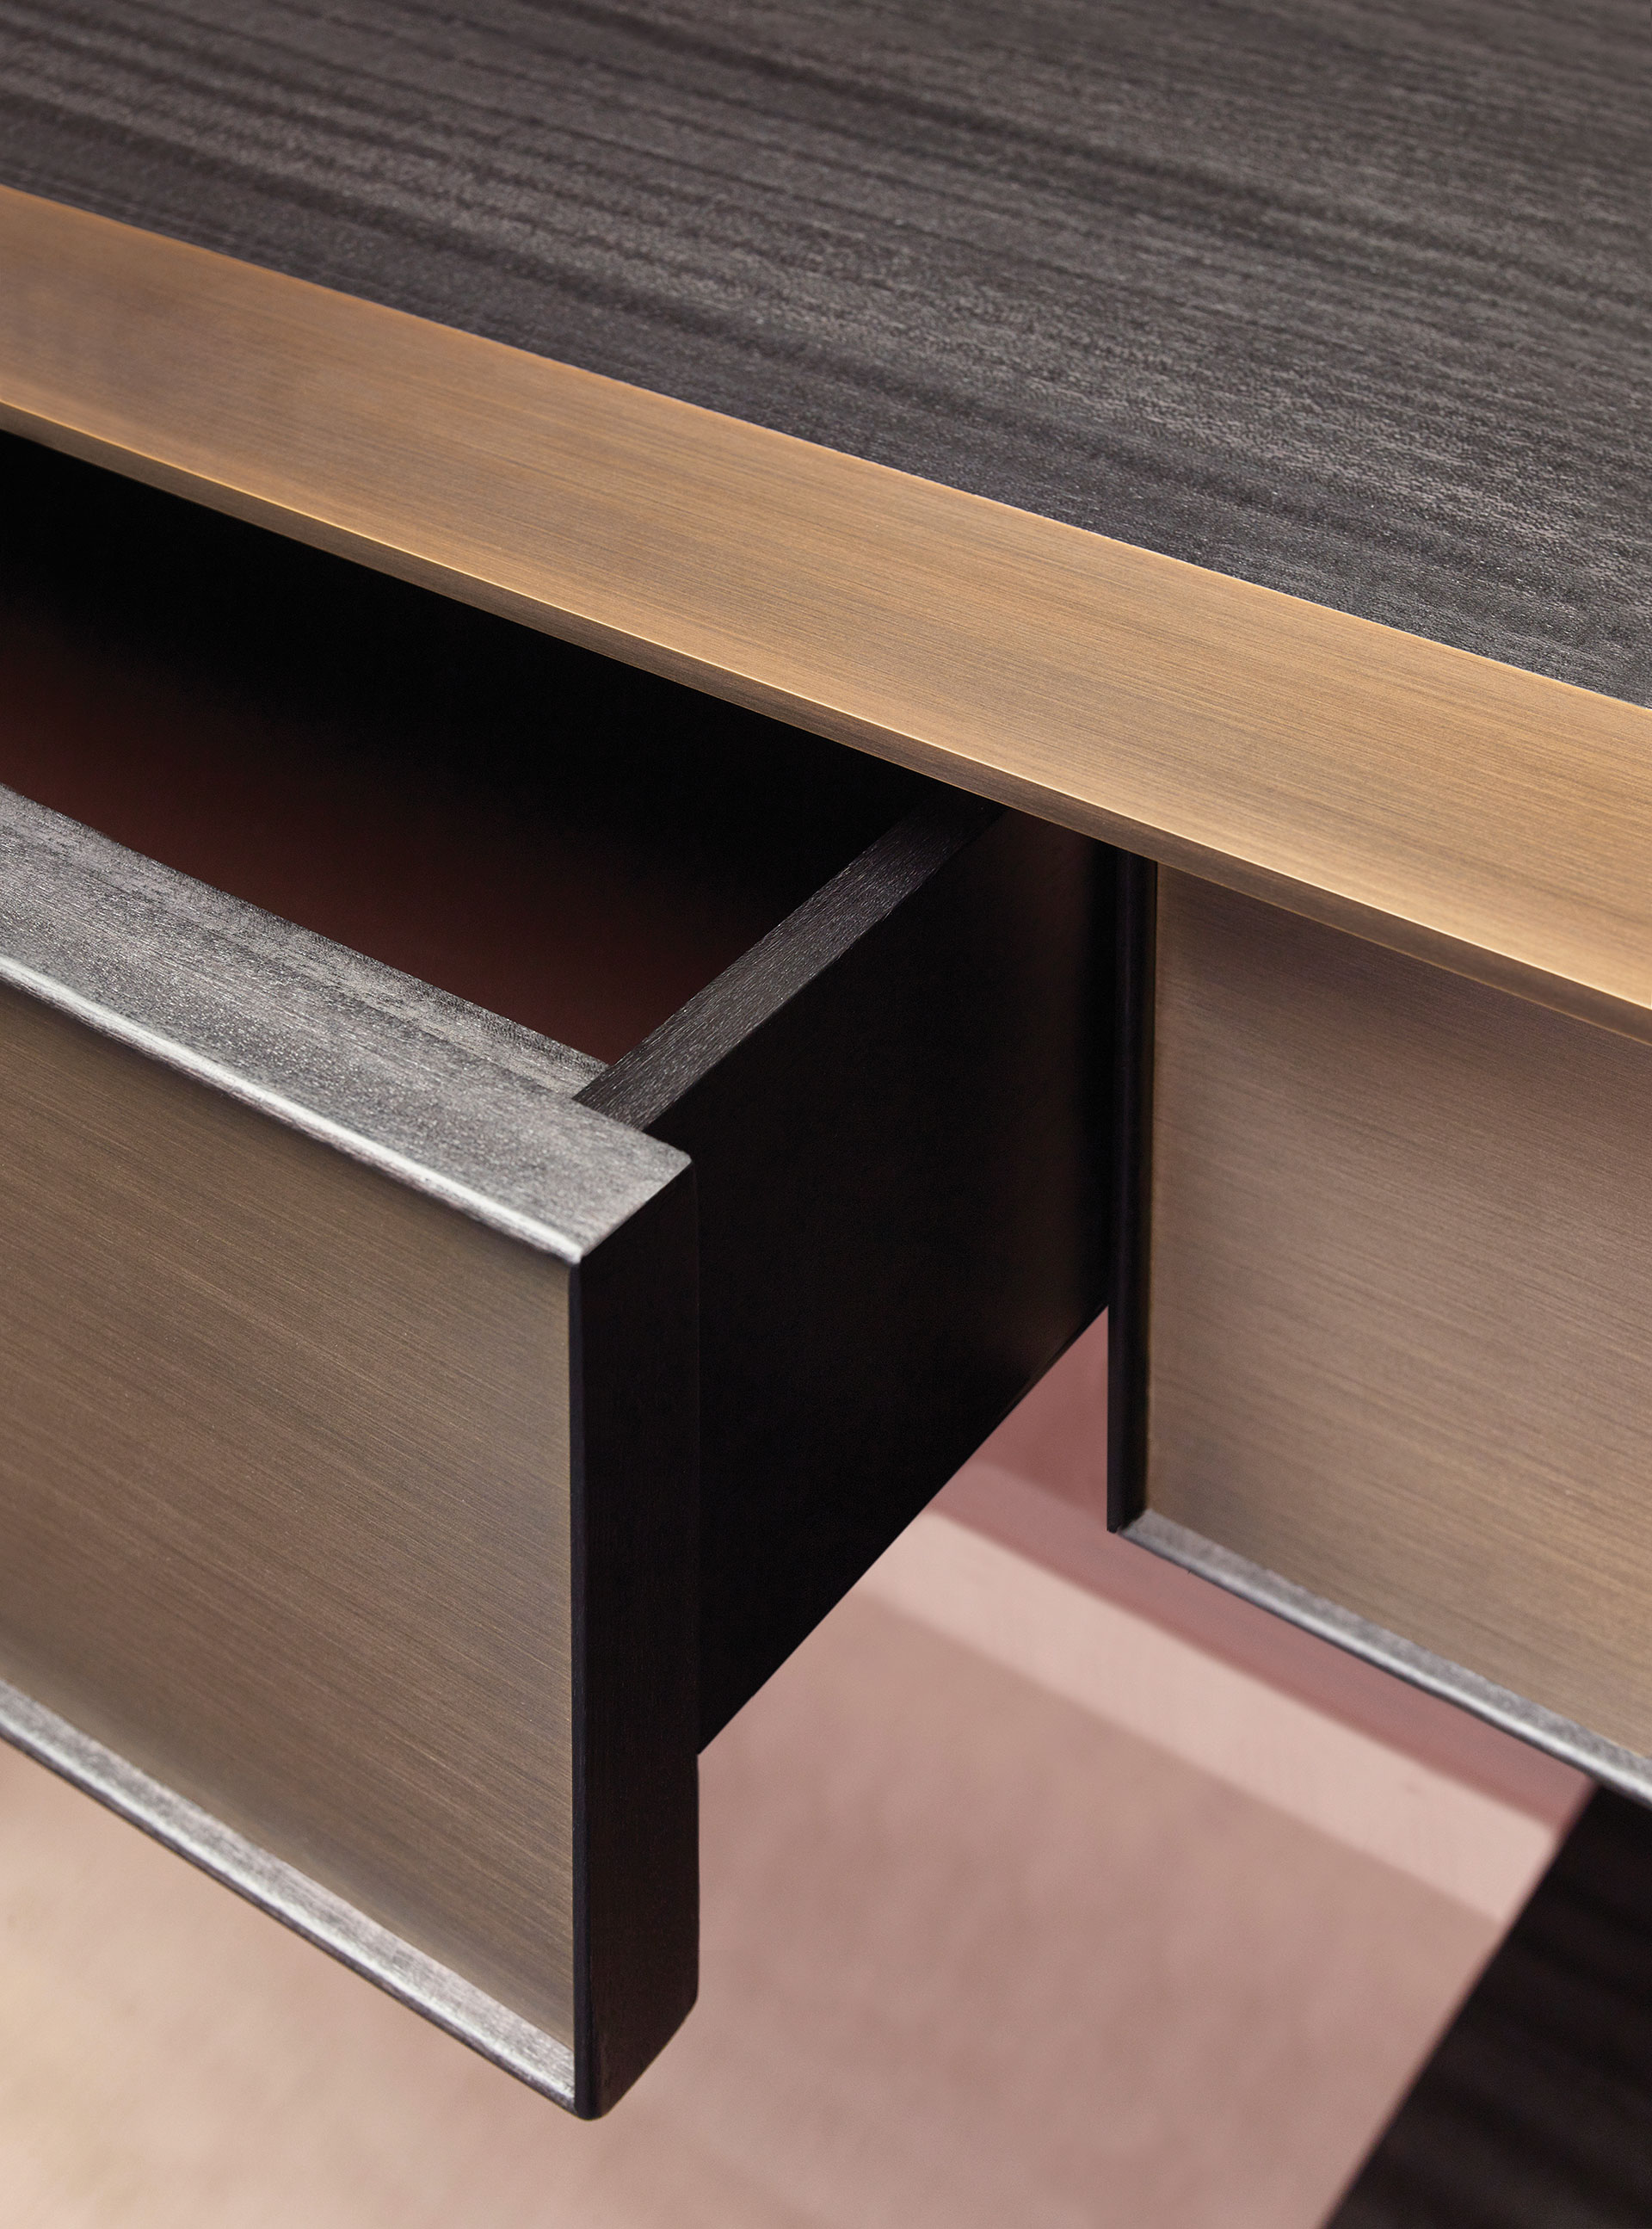 Drawers' detail of La Belle Aurore, a wooden cabnet with bronze details, from Promemoria's catalogue | Promemoria